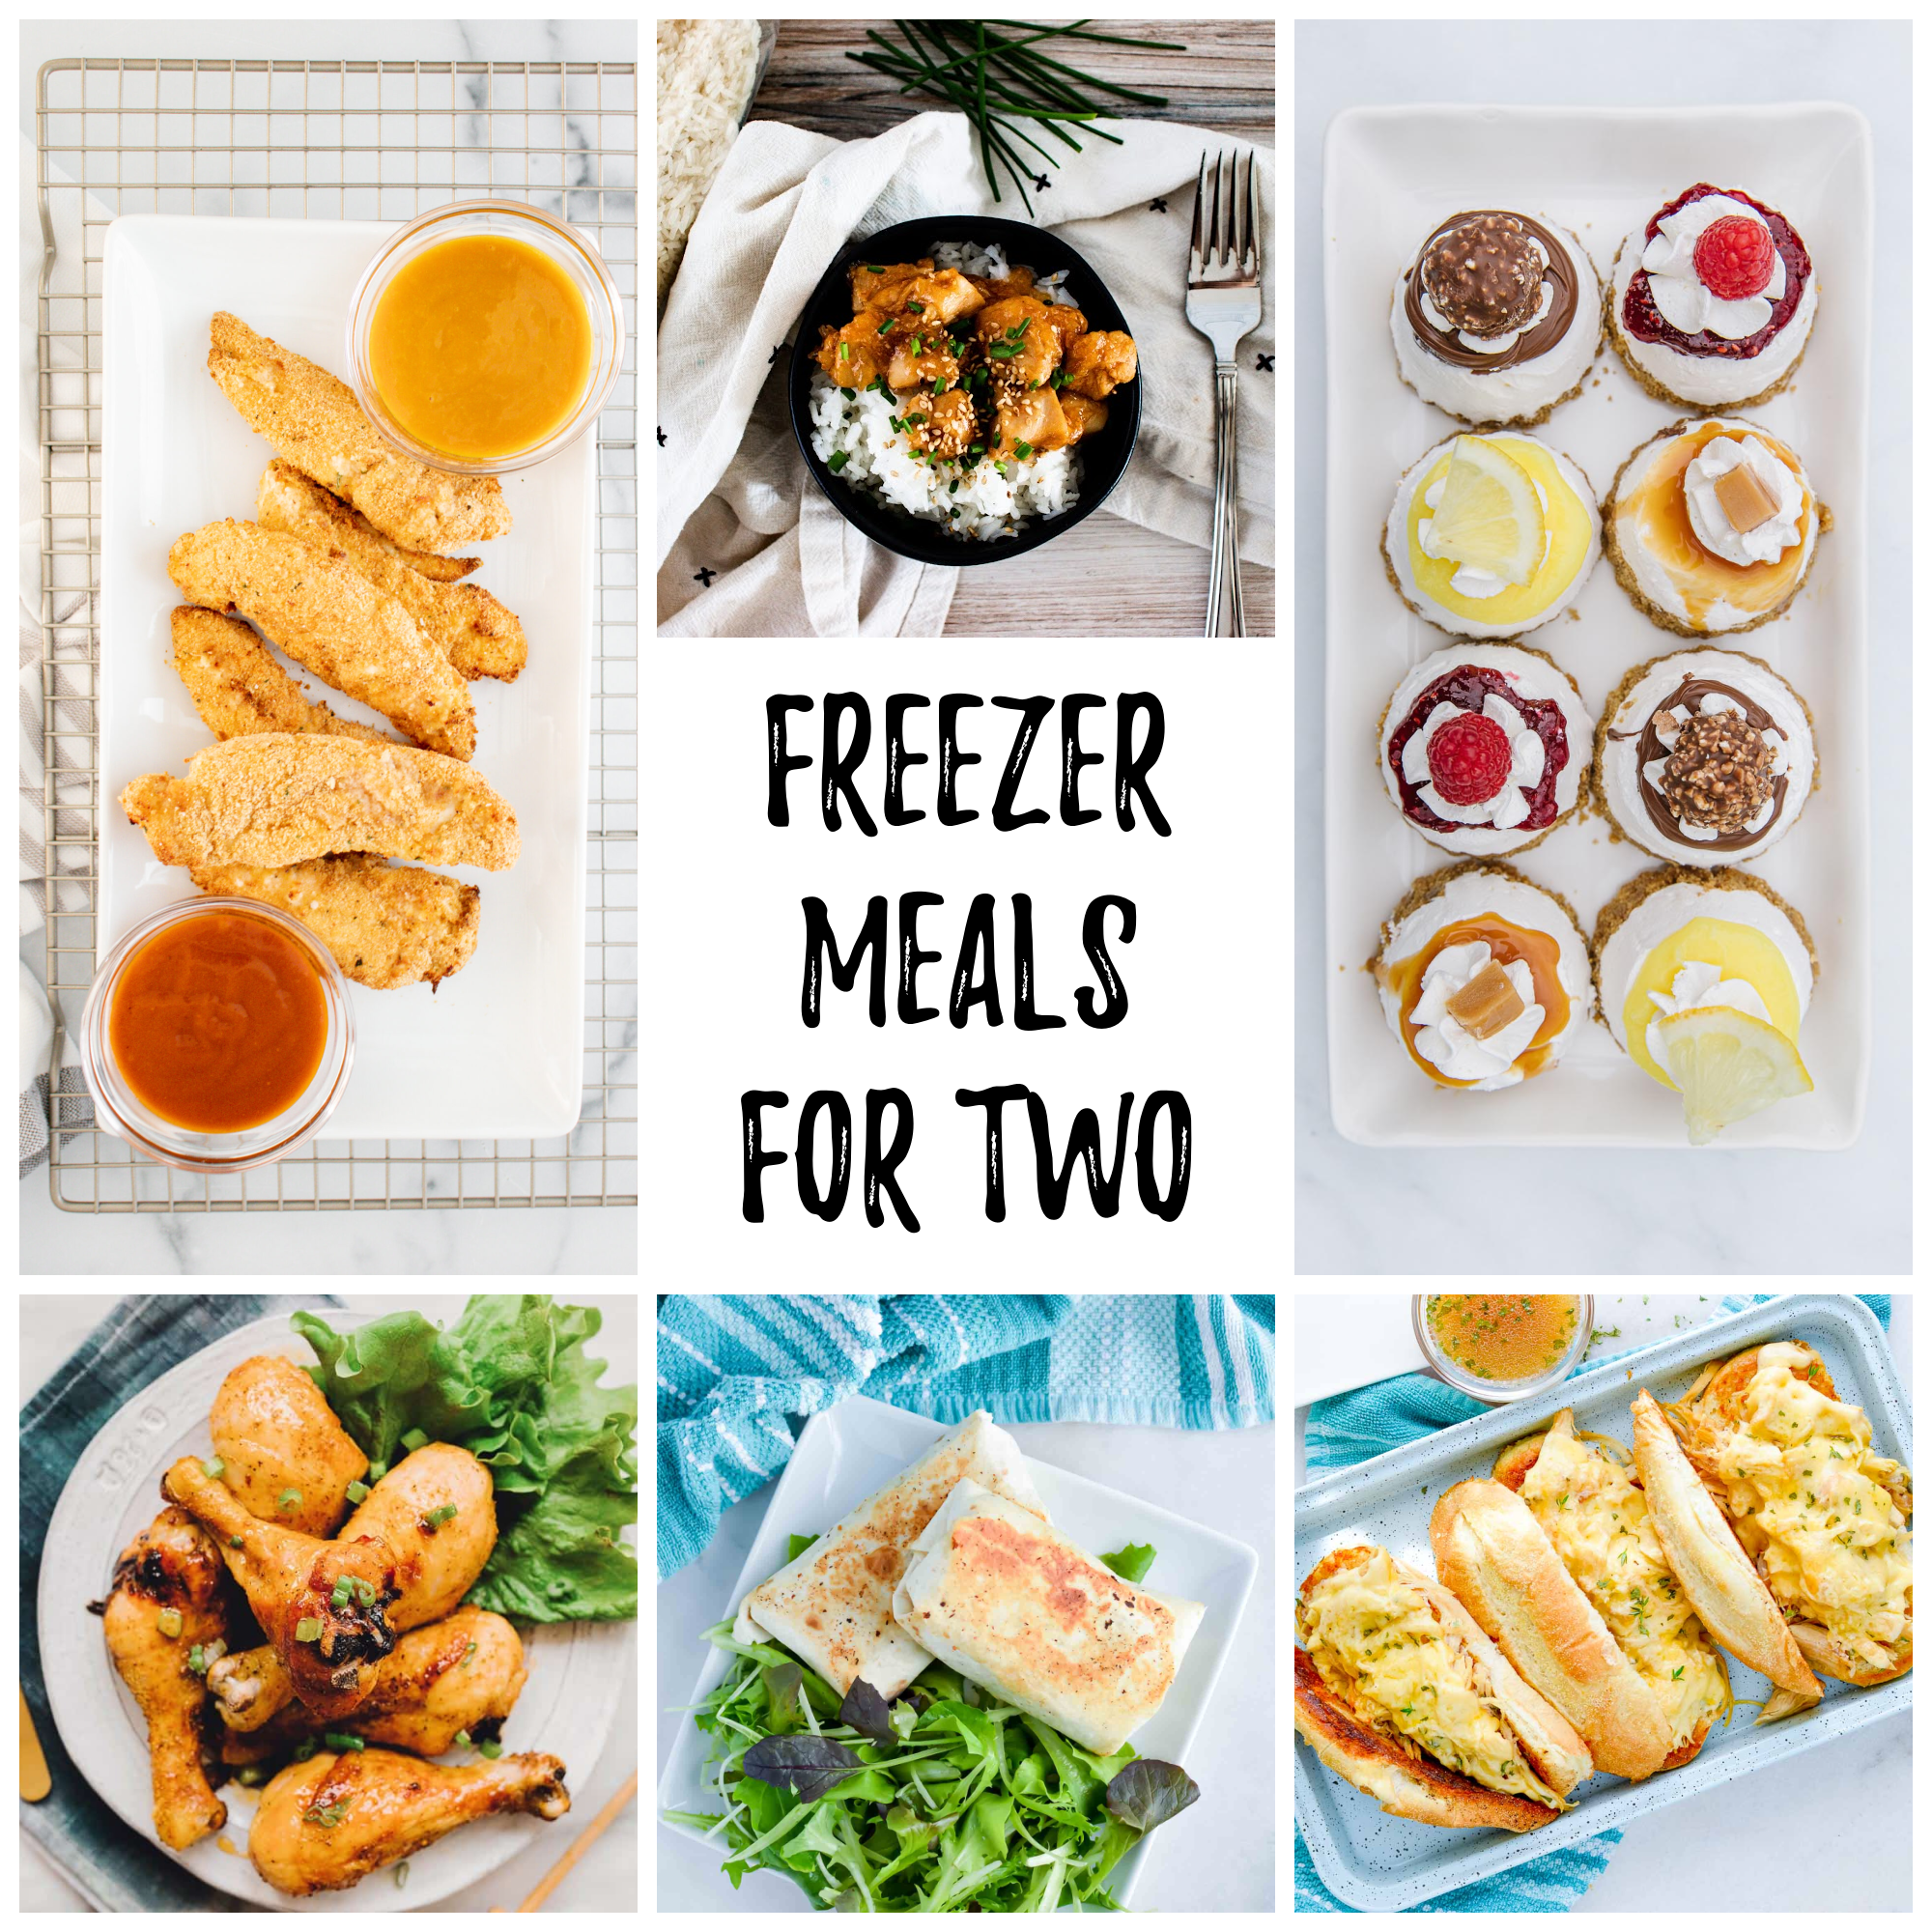 6 completed dinner ideas with the words "freezer meals for two" in the middle.